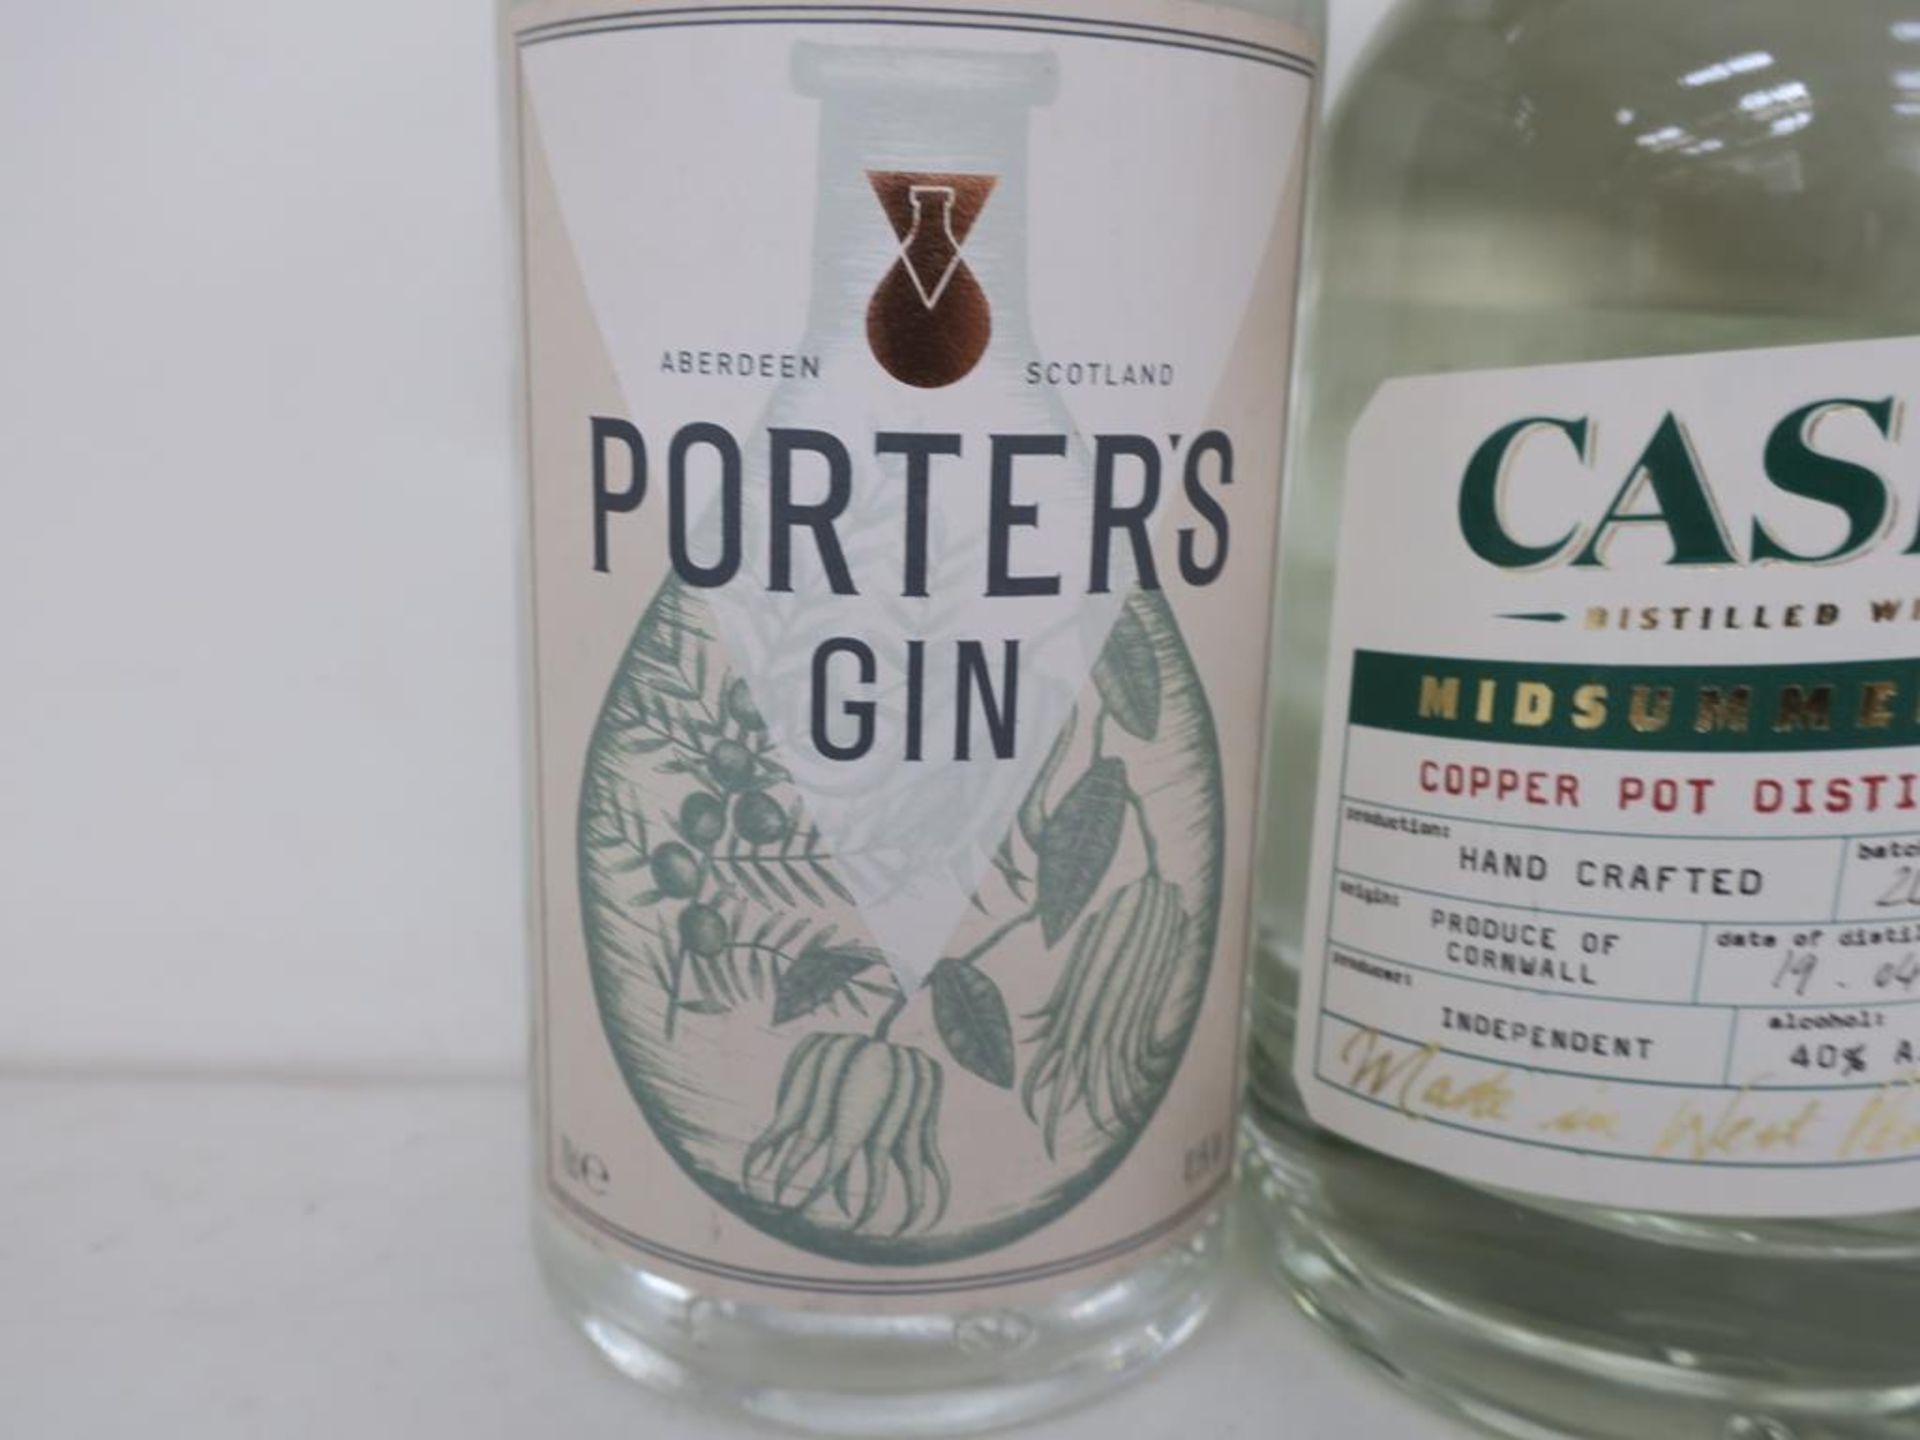 * Three bottles of Gin: a 70cl bottle of Caspyn Midsummer Dry Gin 40% vol, a 70cl bottle of 987 - Image 2 of 7